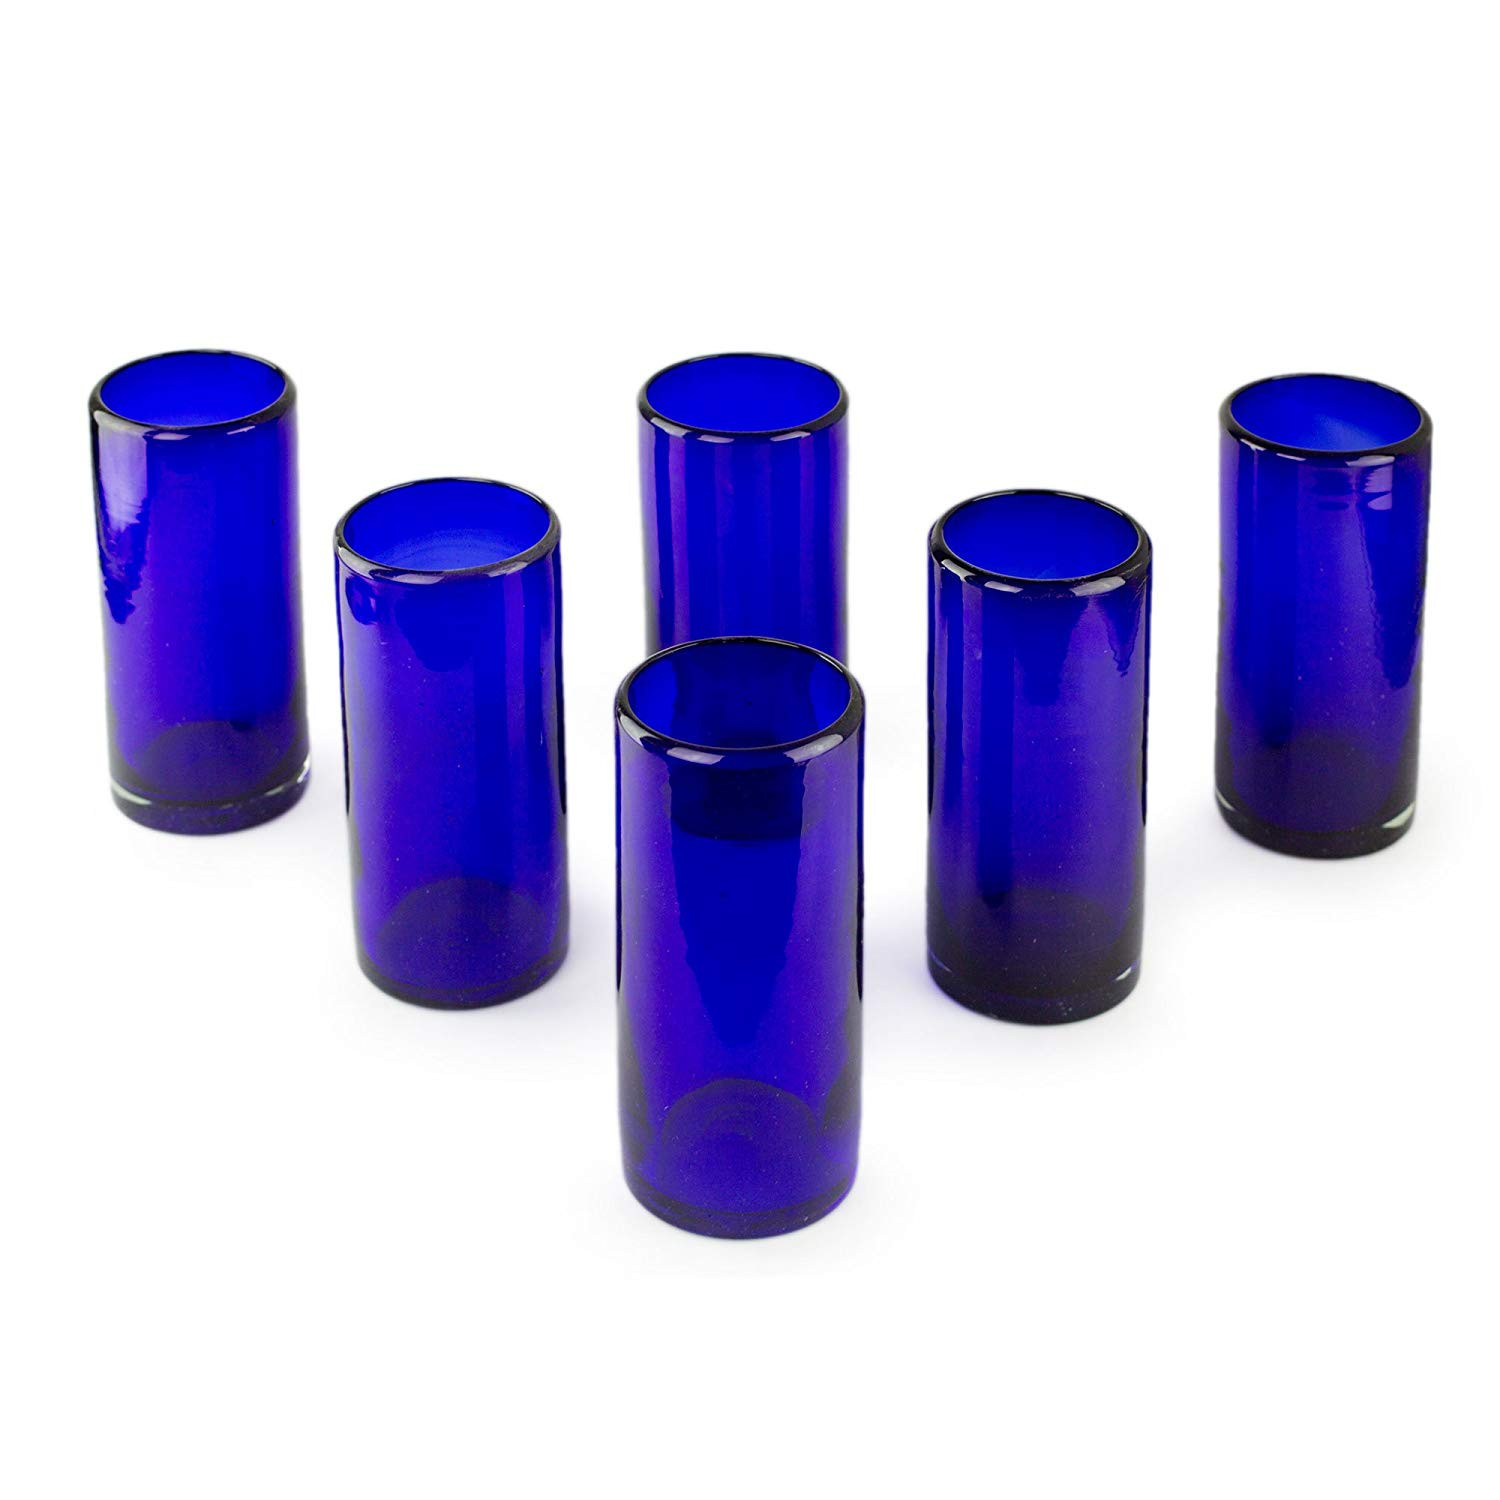 12 Perfect Heavy Blue Glass Vase 2024 free download heavy blue glass vase of amazon com novica artisan crafted dark blue recycled glass hand in amazon com novica artisan crafted dark blue recycled glass hand blown cocktail glasses 13 oz pure 